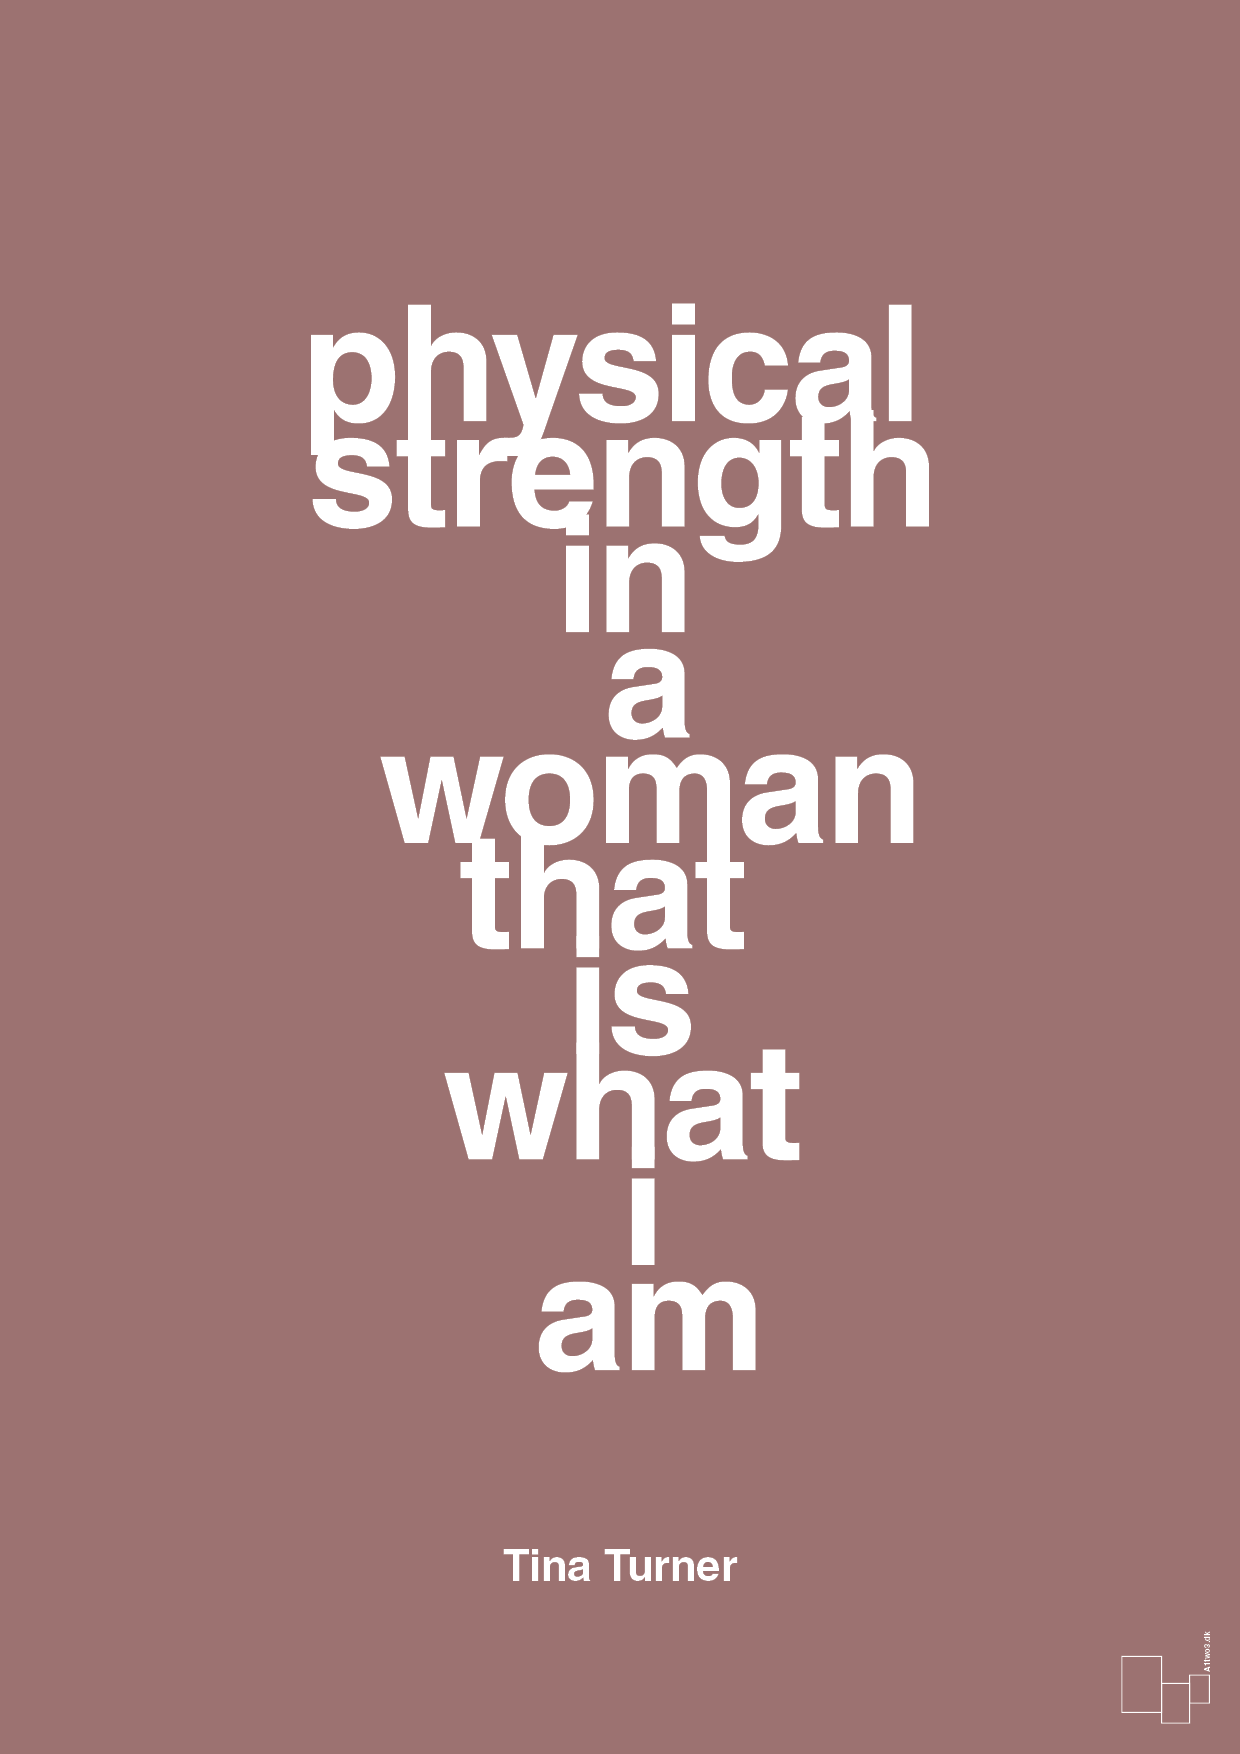 physical strength in a woman that’s what I am - Plakat med Citater i Plum